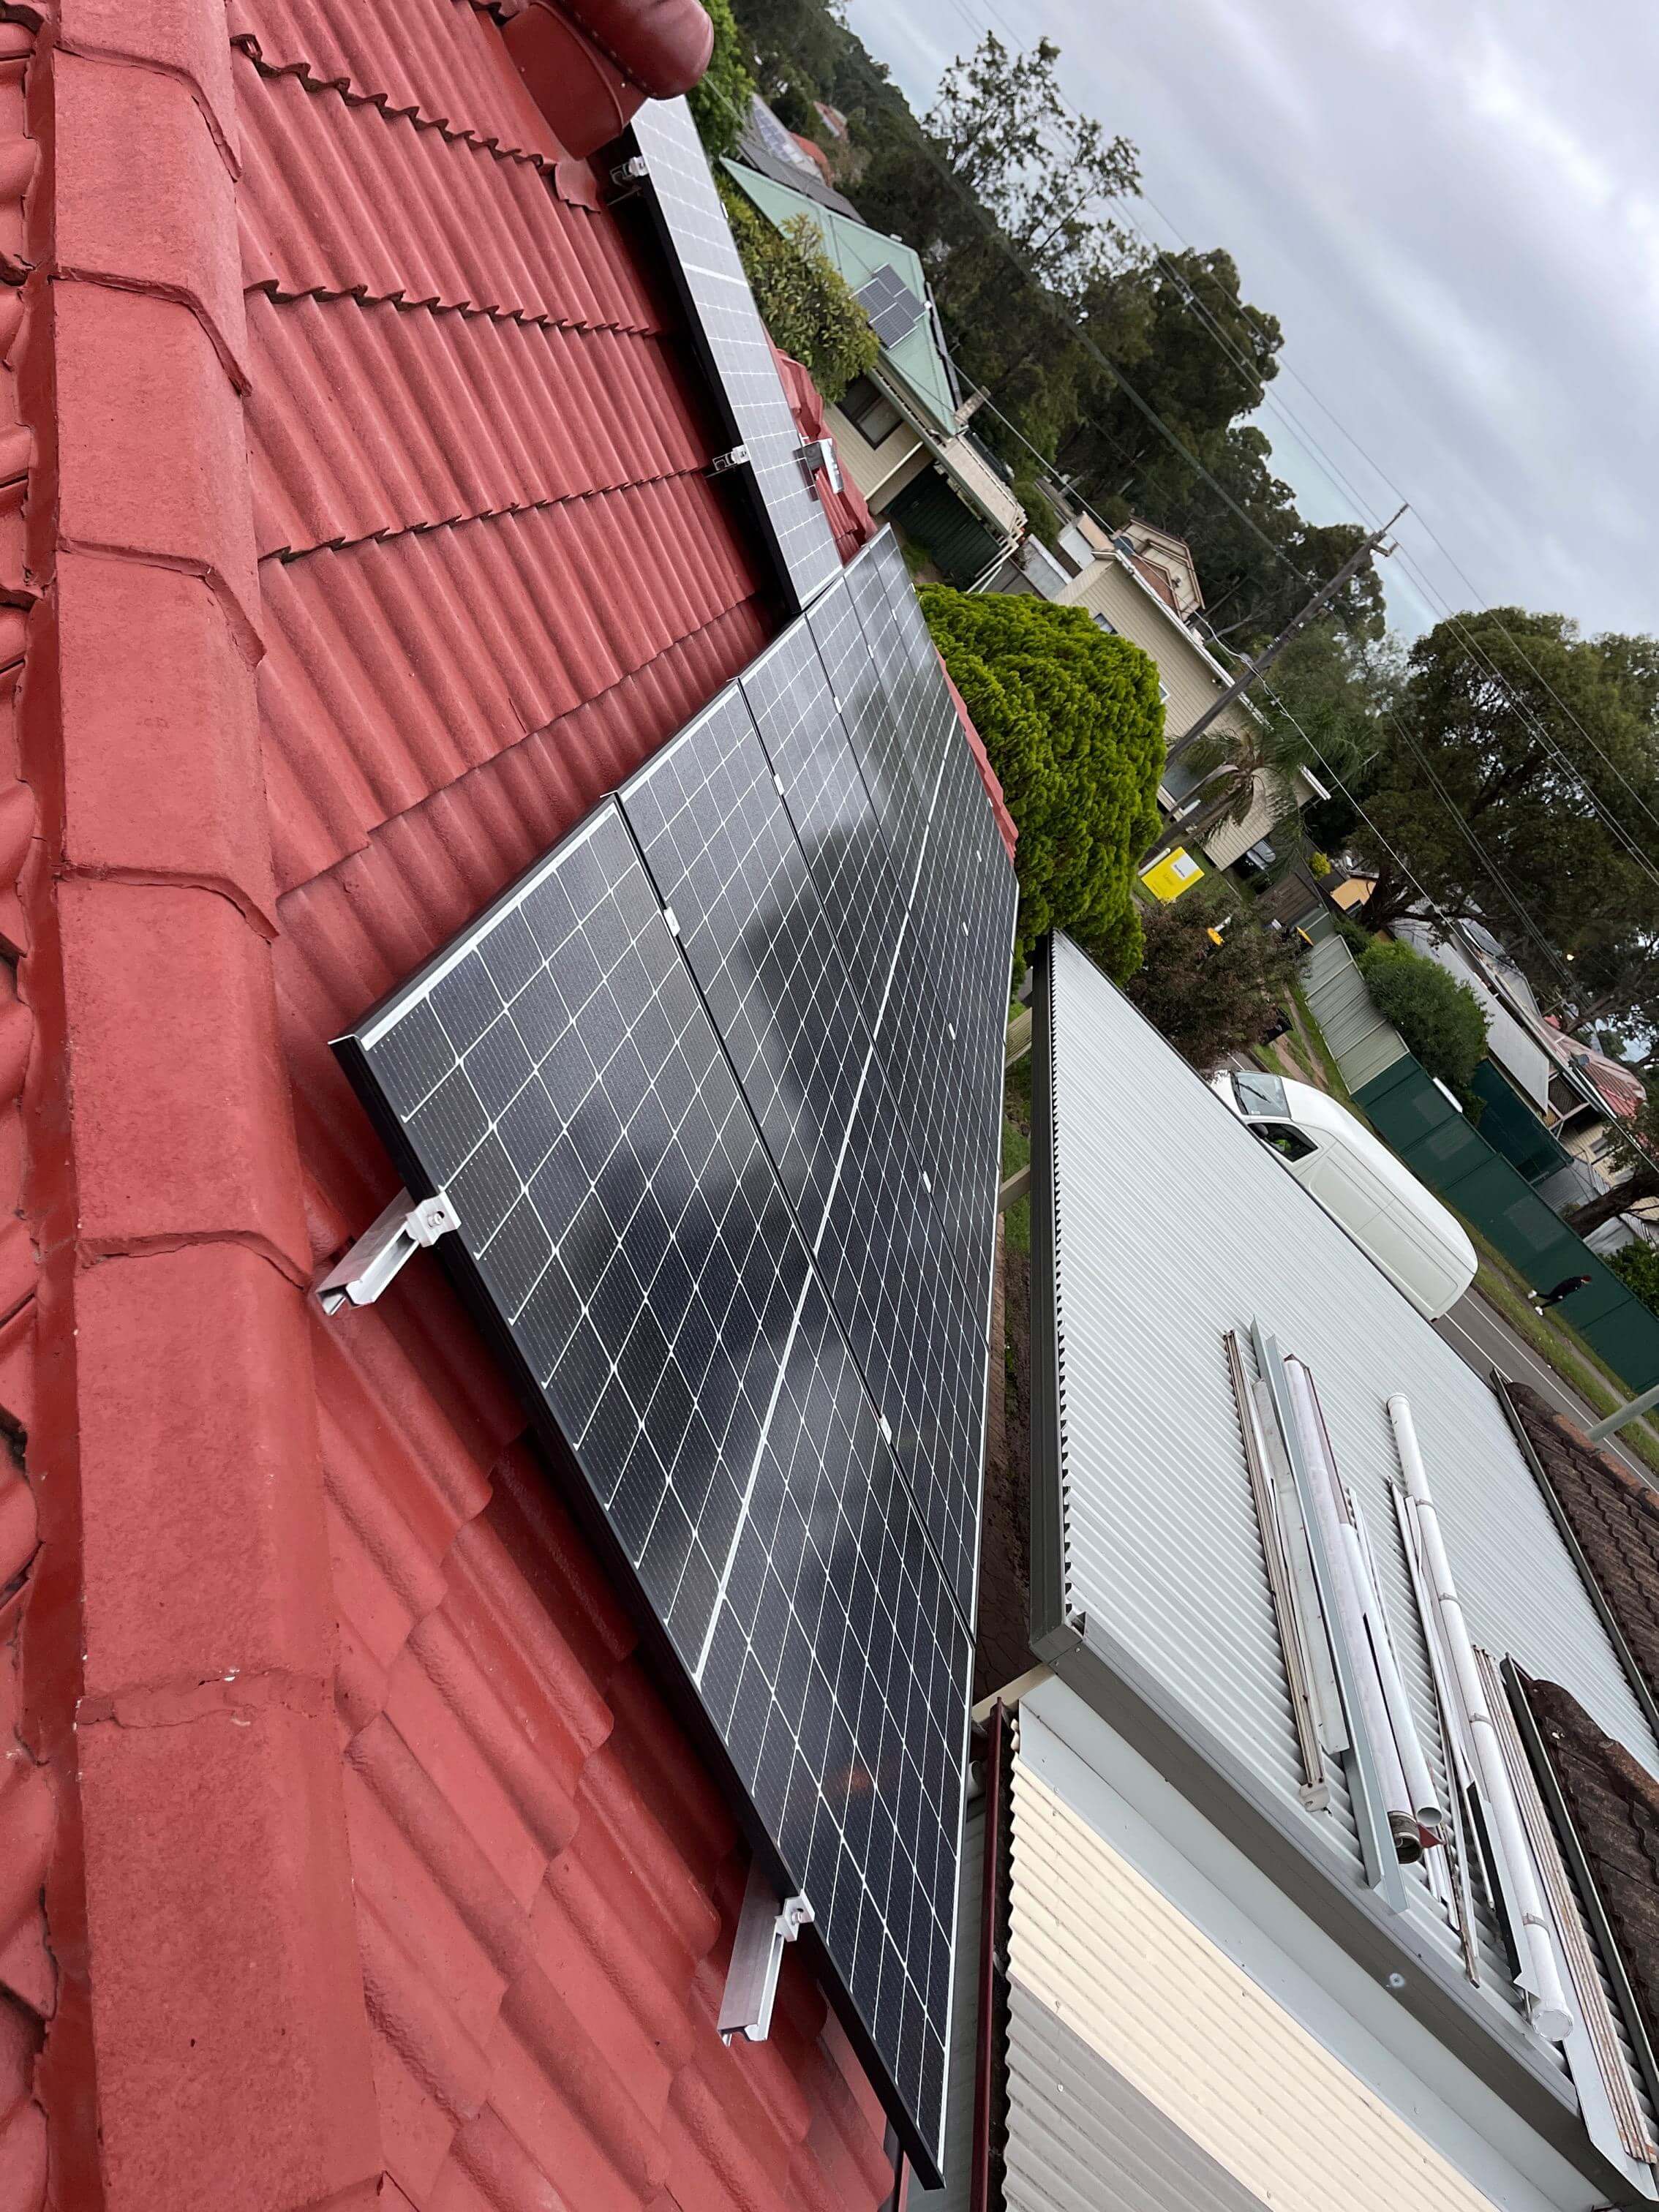 15kW solar power system – An ideal fit for large homes and businesses